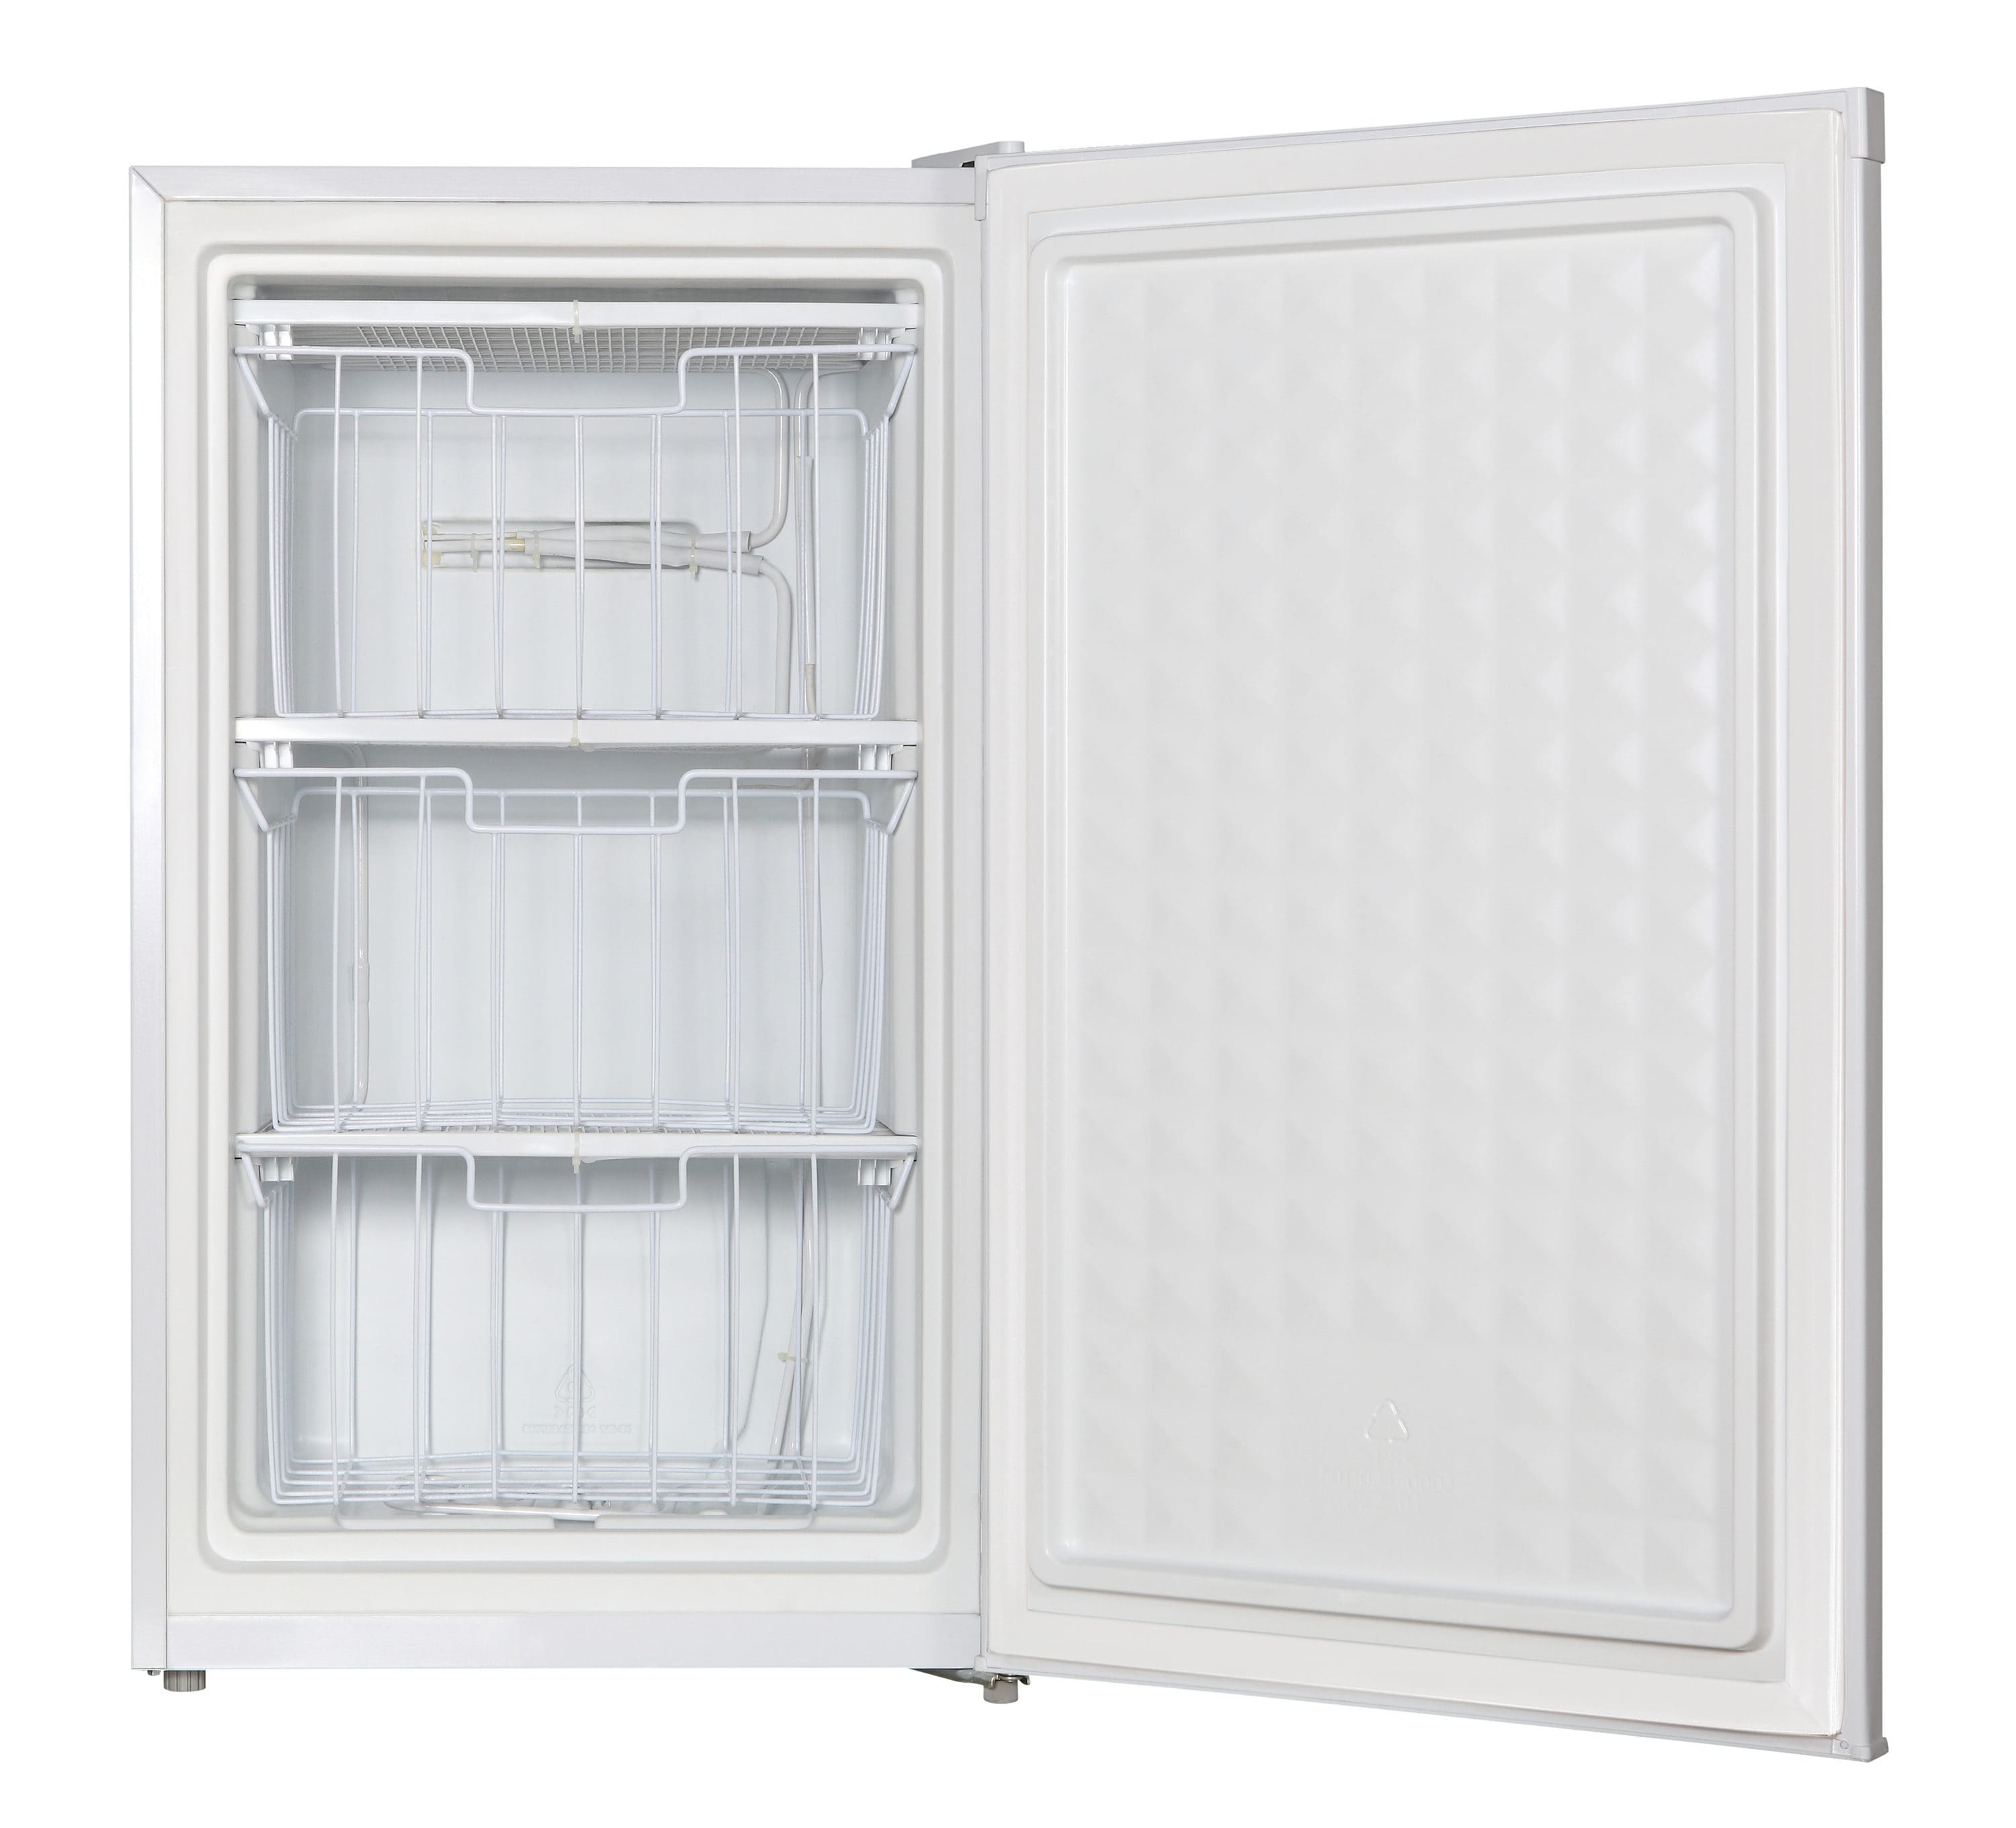 Upright Freezers at Lowe's